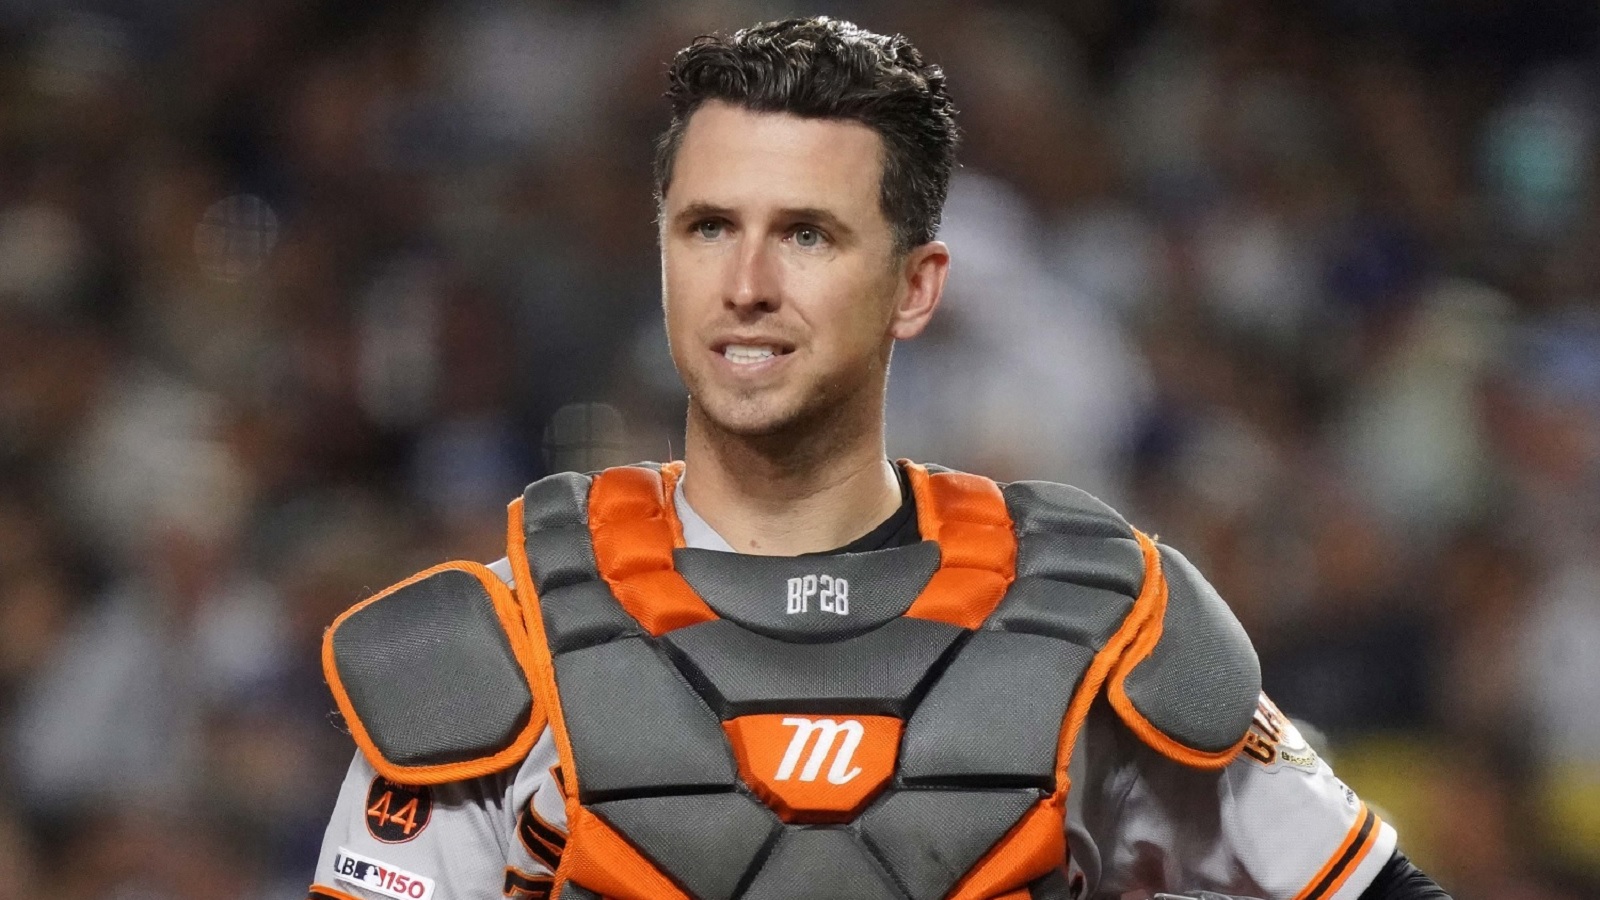 Did Buster Posey's successful investment play part in retirement decision?